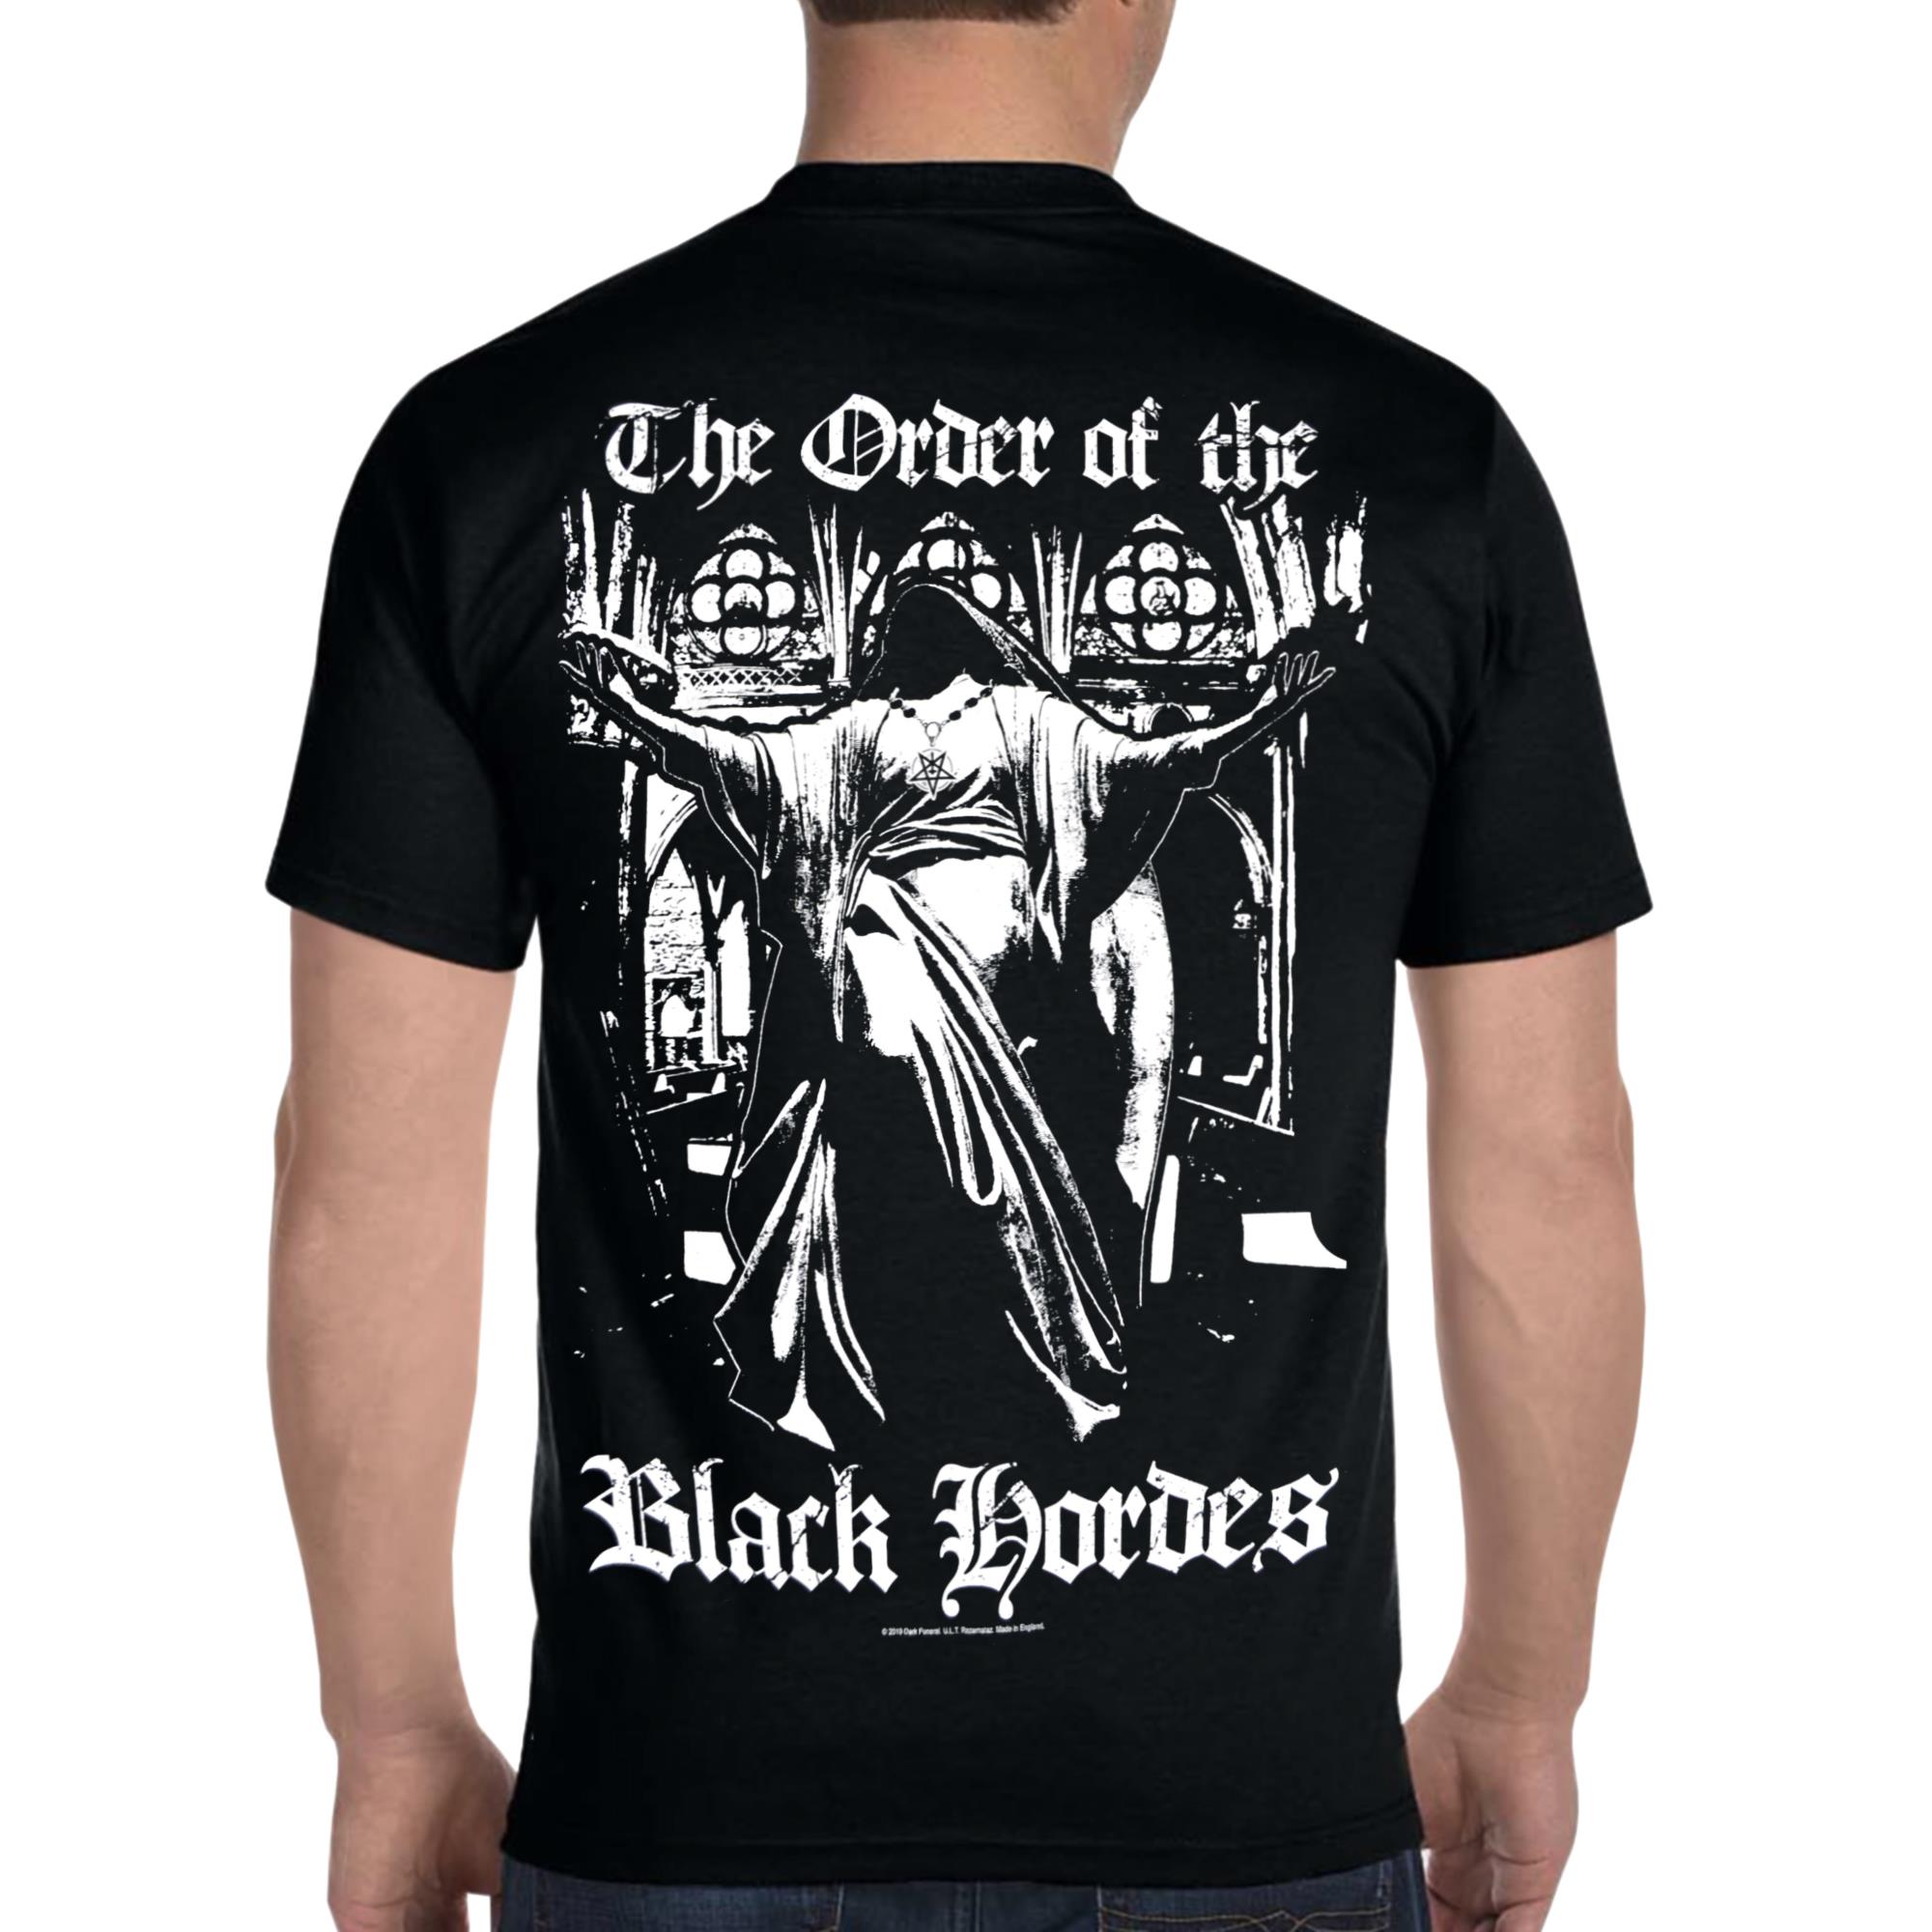 The Order of the Black Hordes T-Shirt